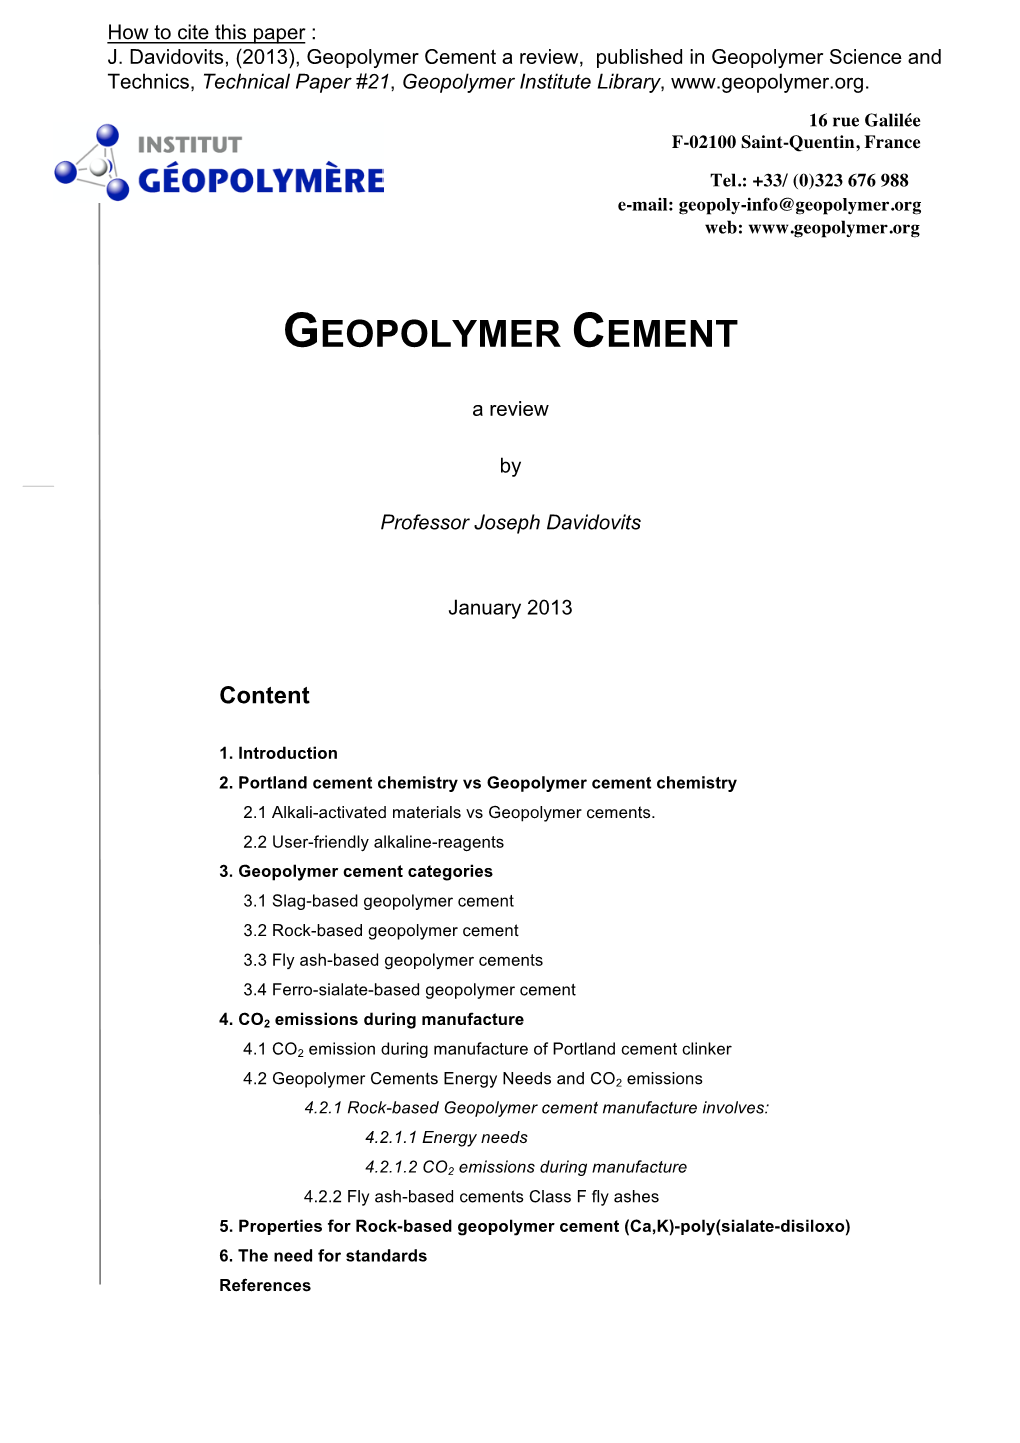 Geopolymer Cement a Review, Published in Geopolymer Science and Technics, Technical Paper #21, Geopolymer Institute Library